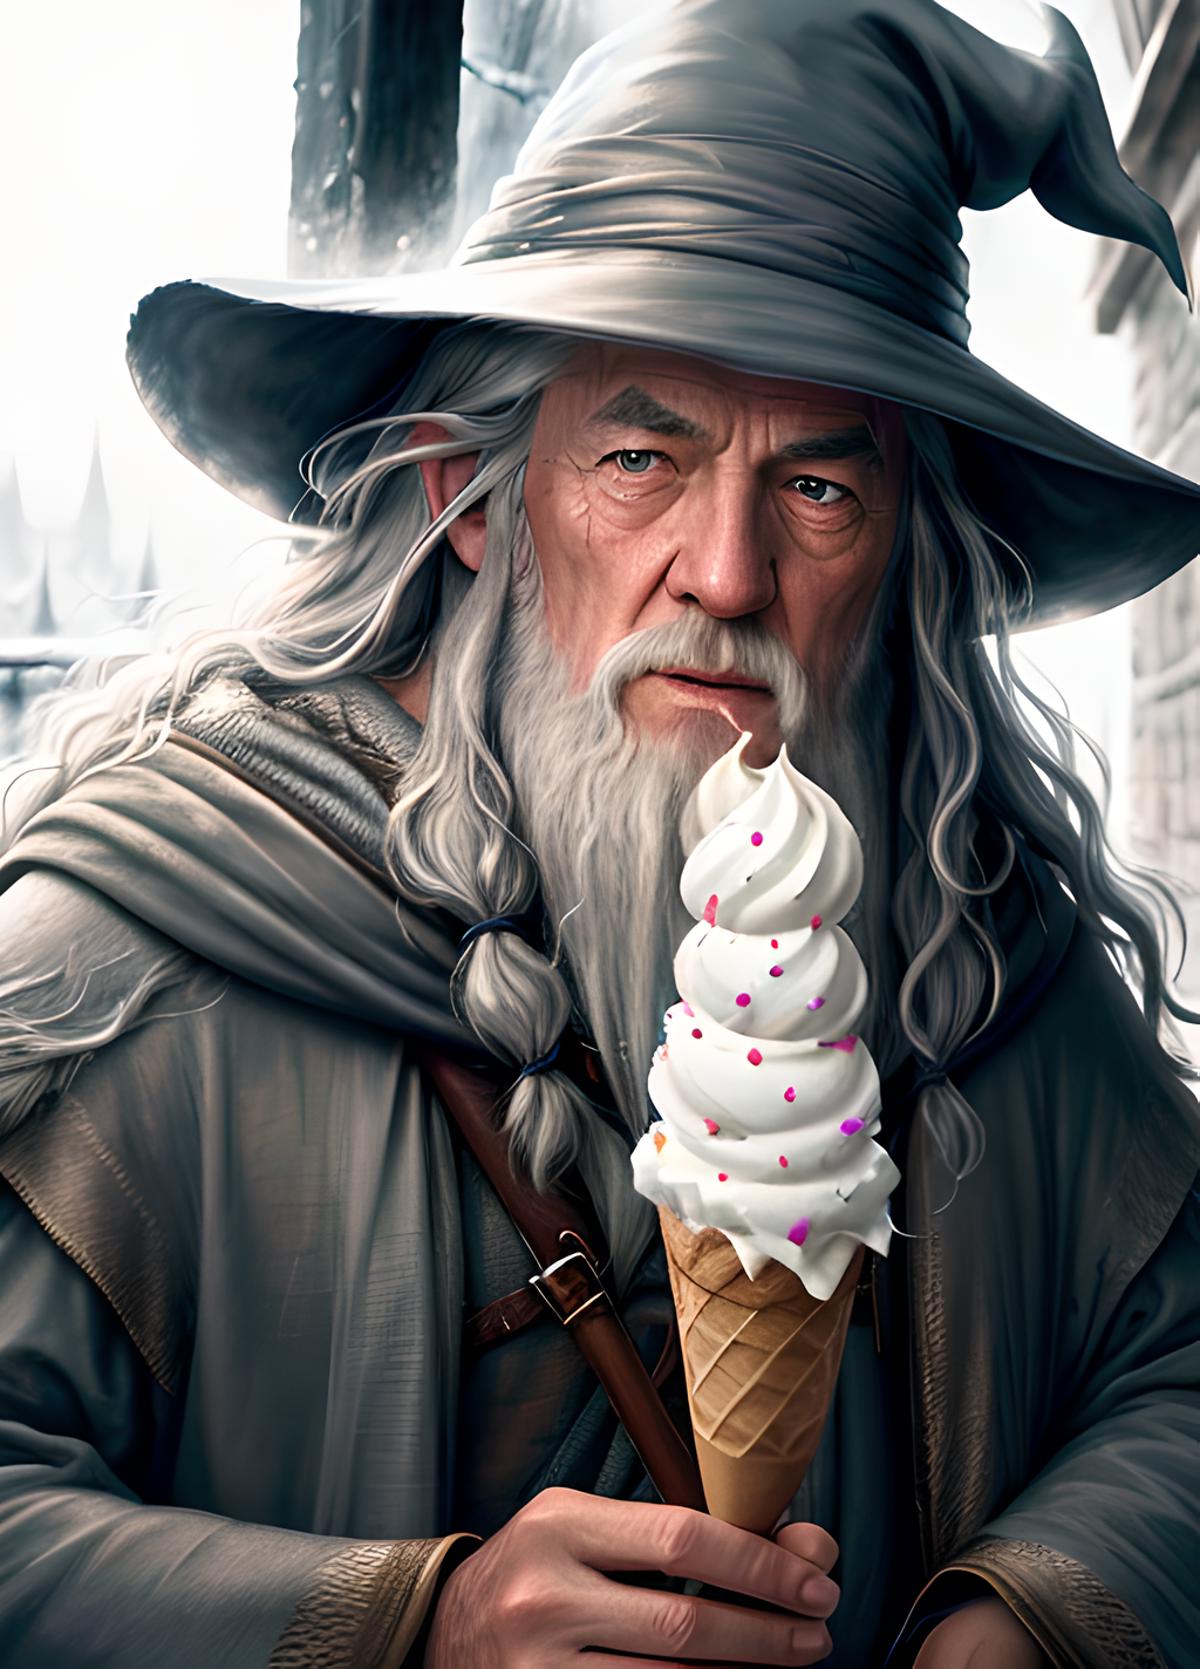 Gandalf the Grey - The Lord of the Rings image by Deni42